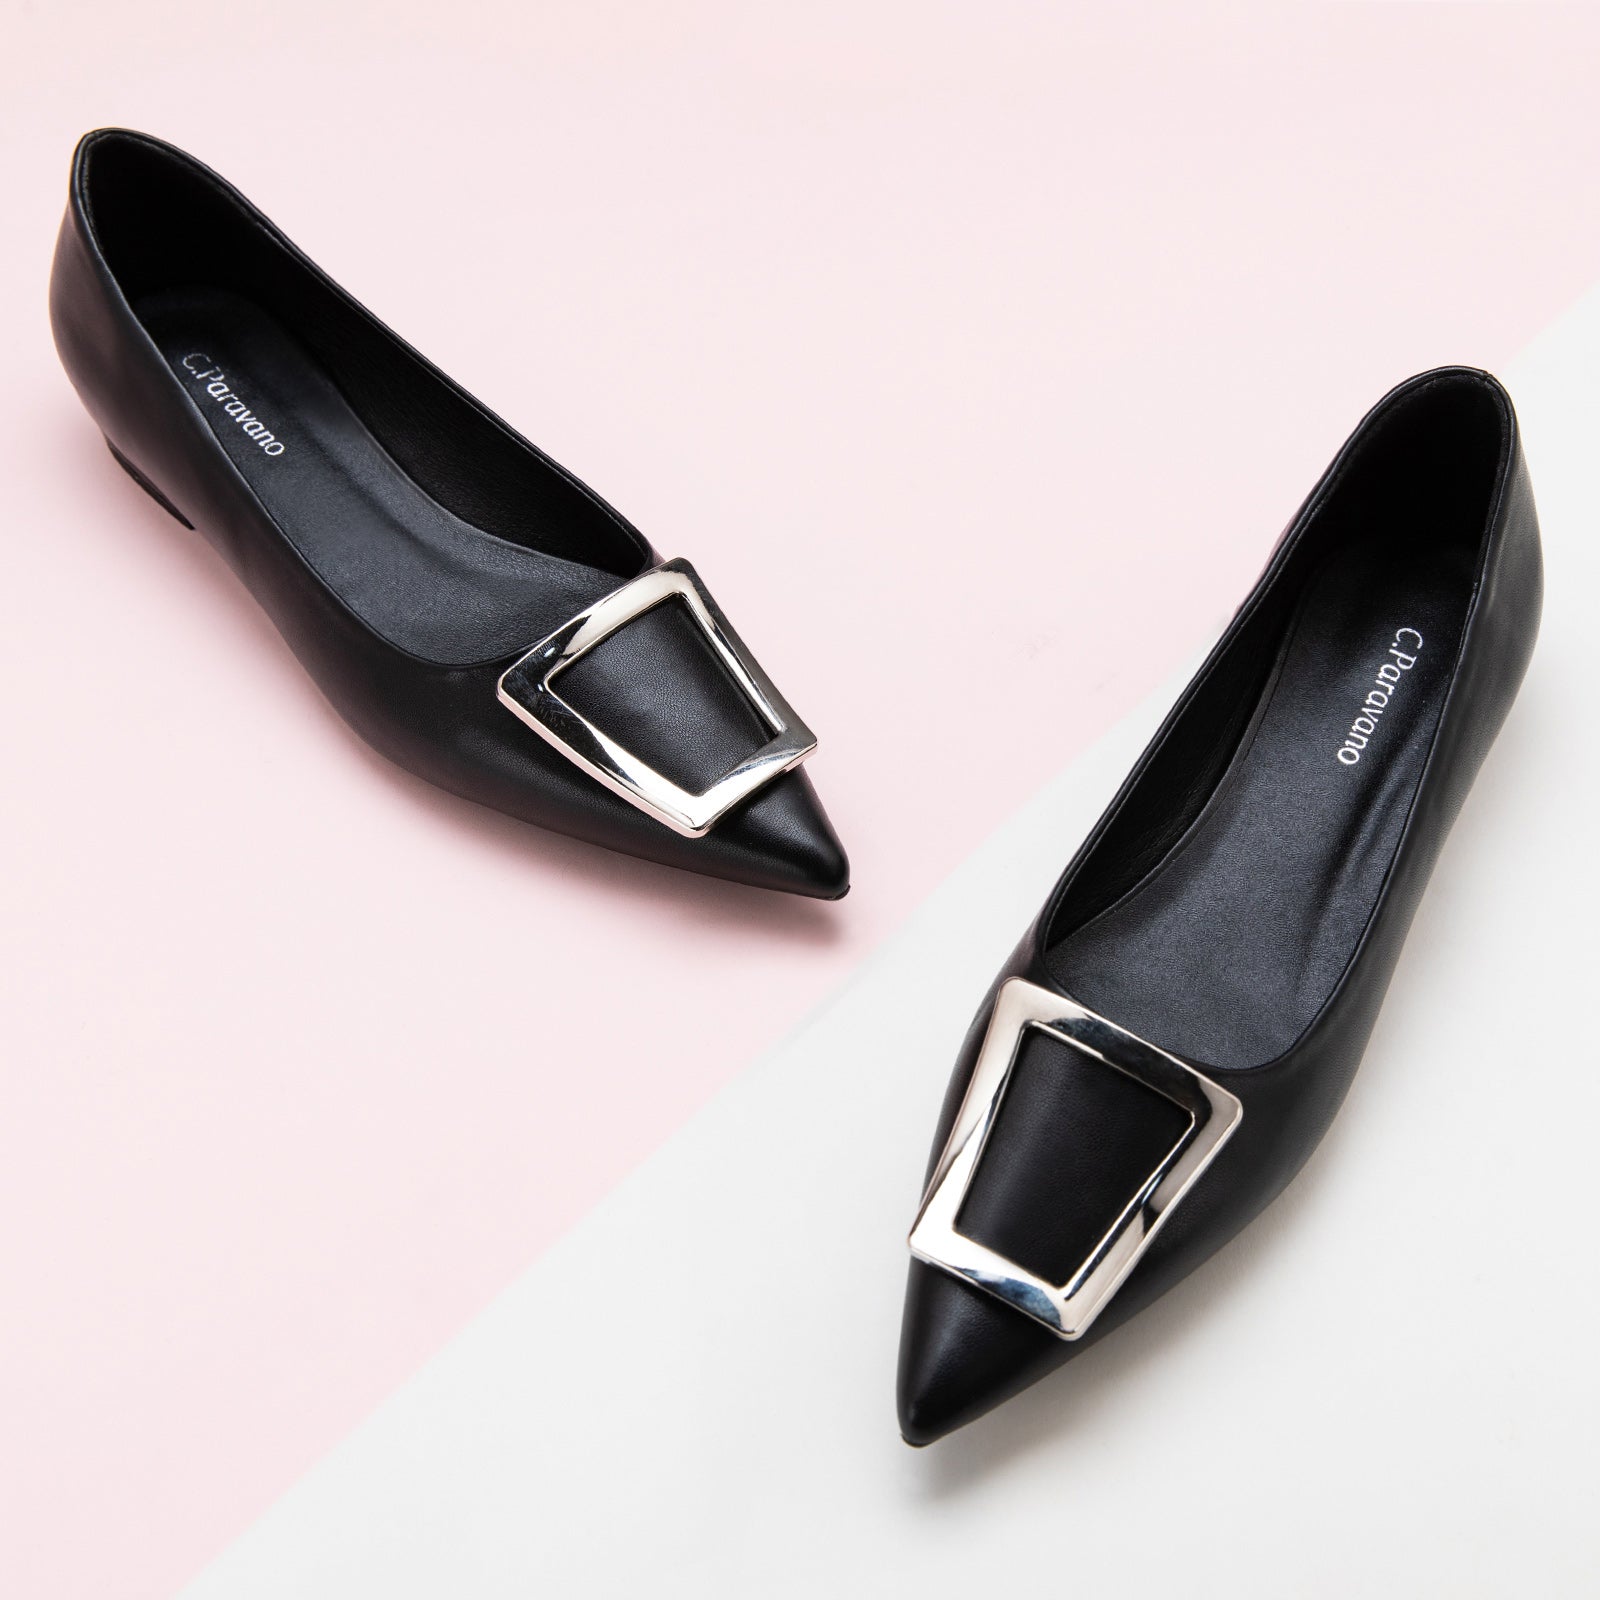  Black Flats with a trapezoidal buckle, perfect for a confident and fashionable look in any urban setting